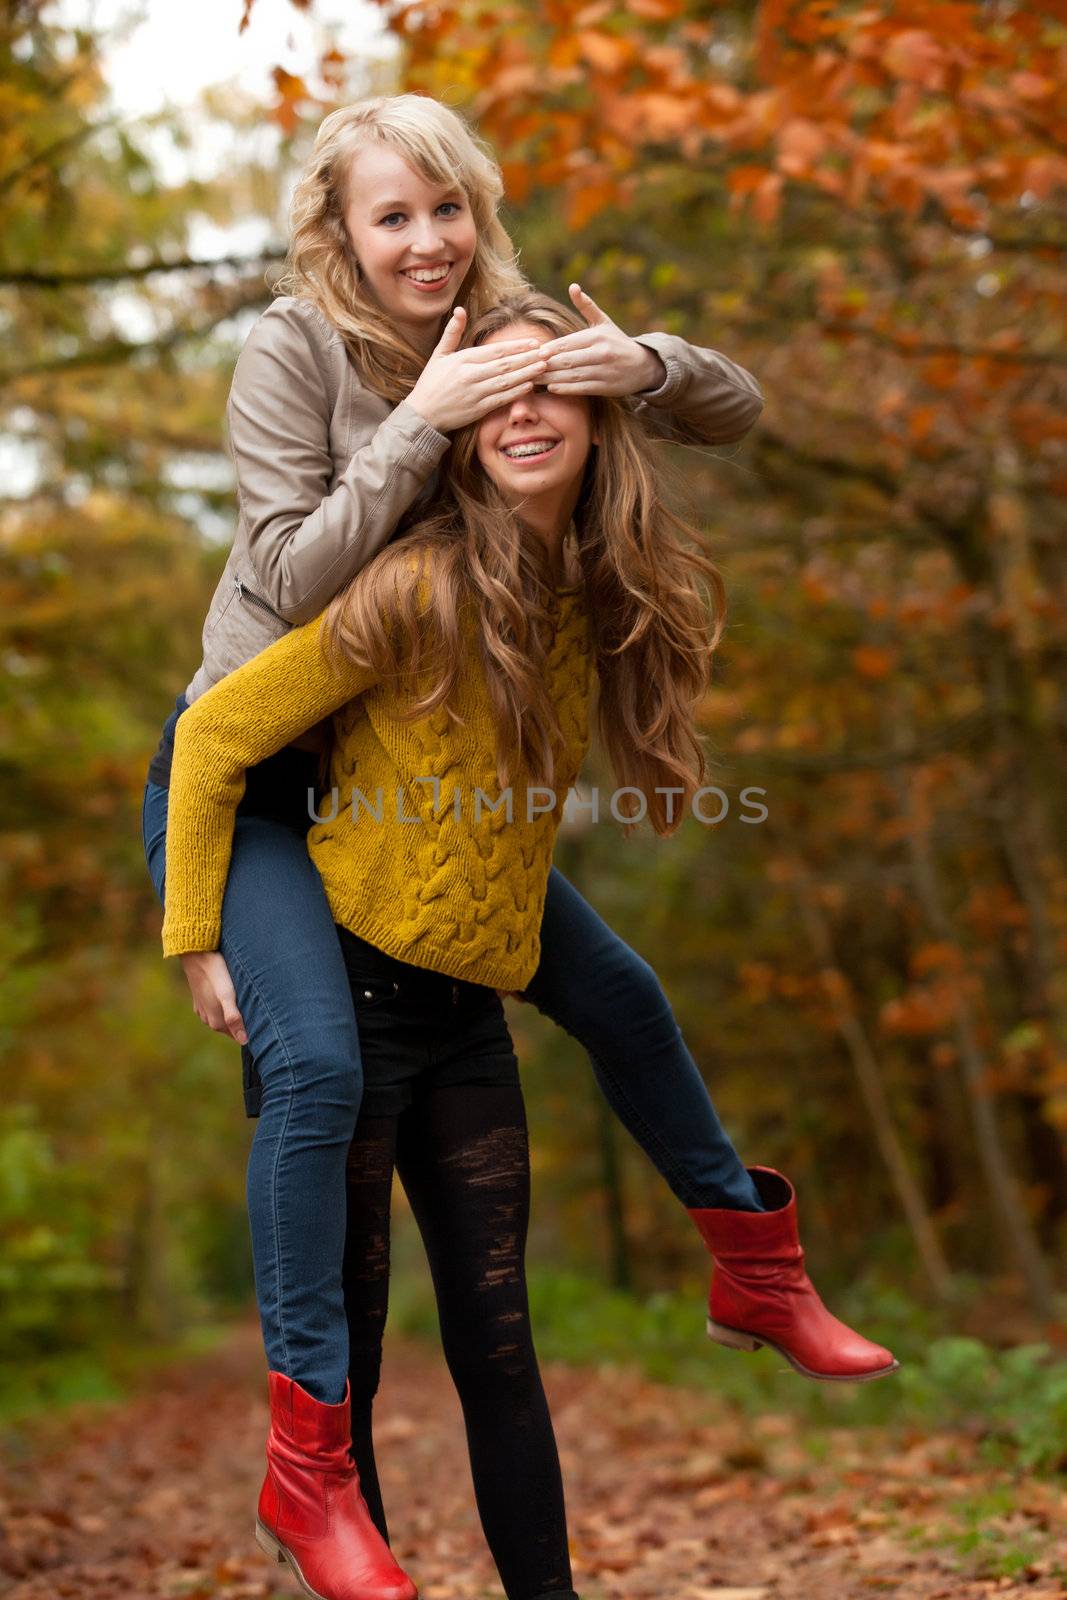 2 girls are having fun in the forest